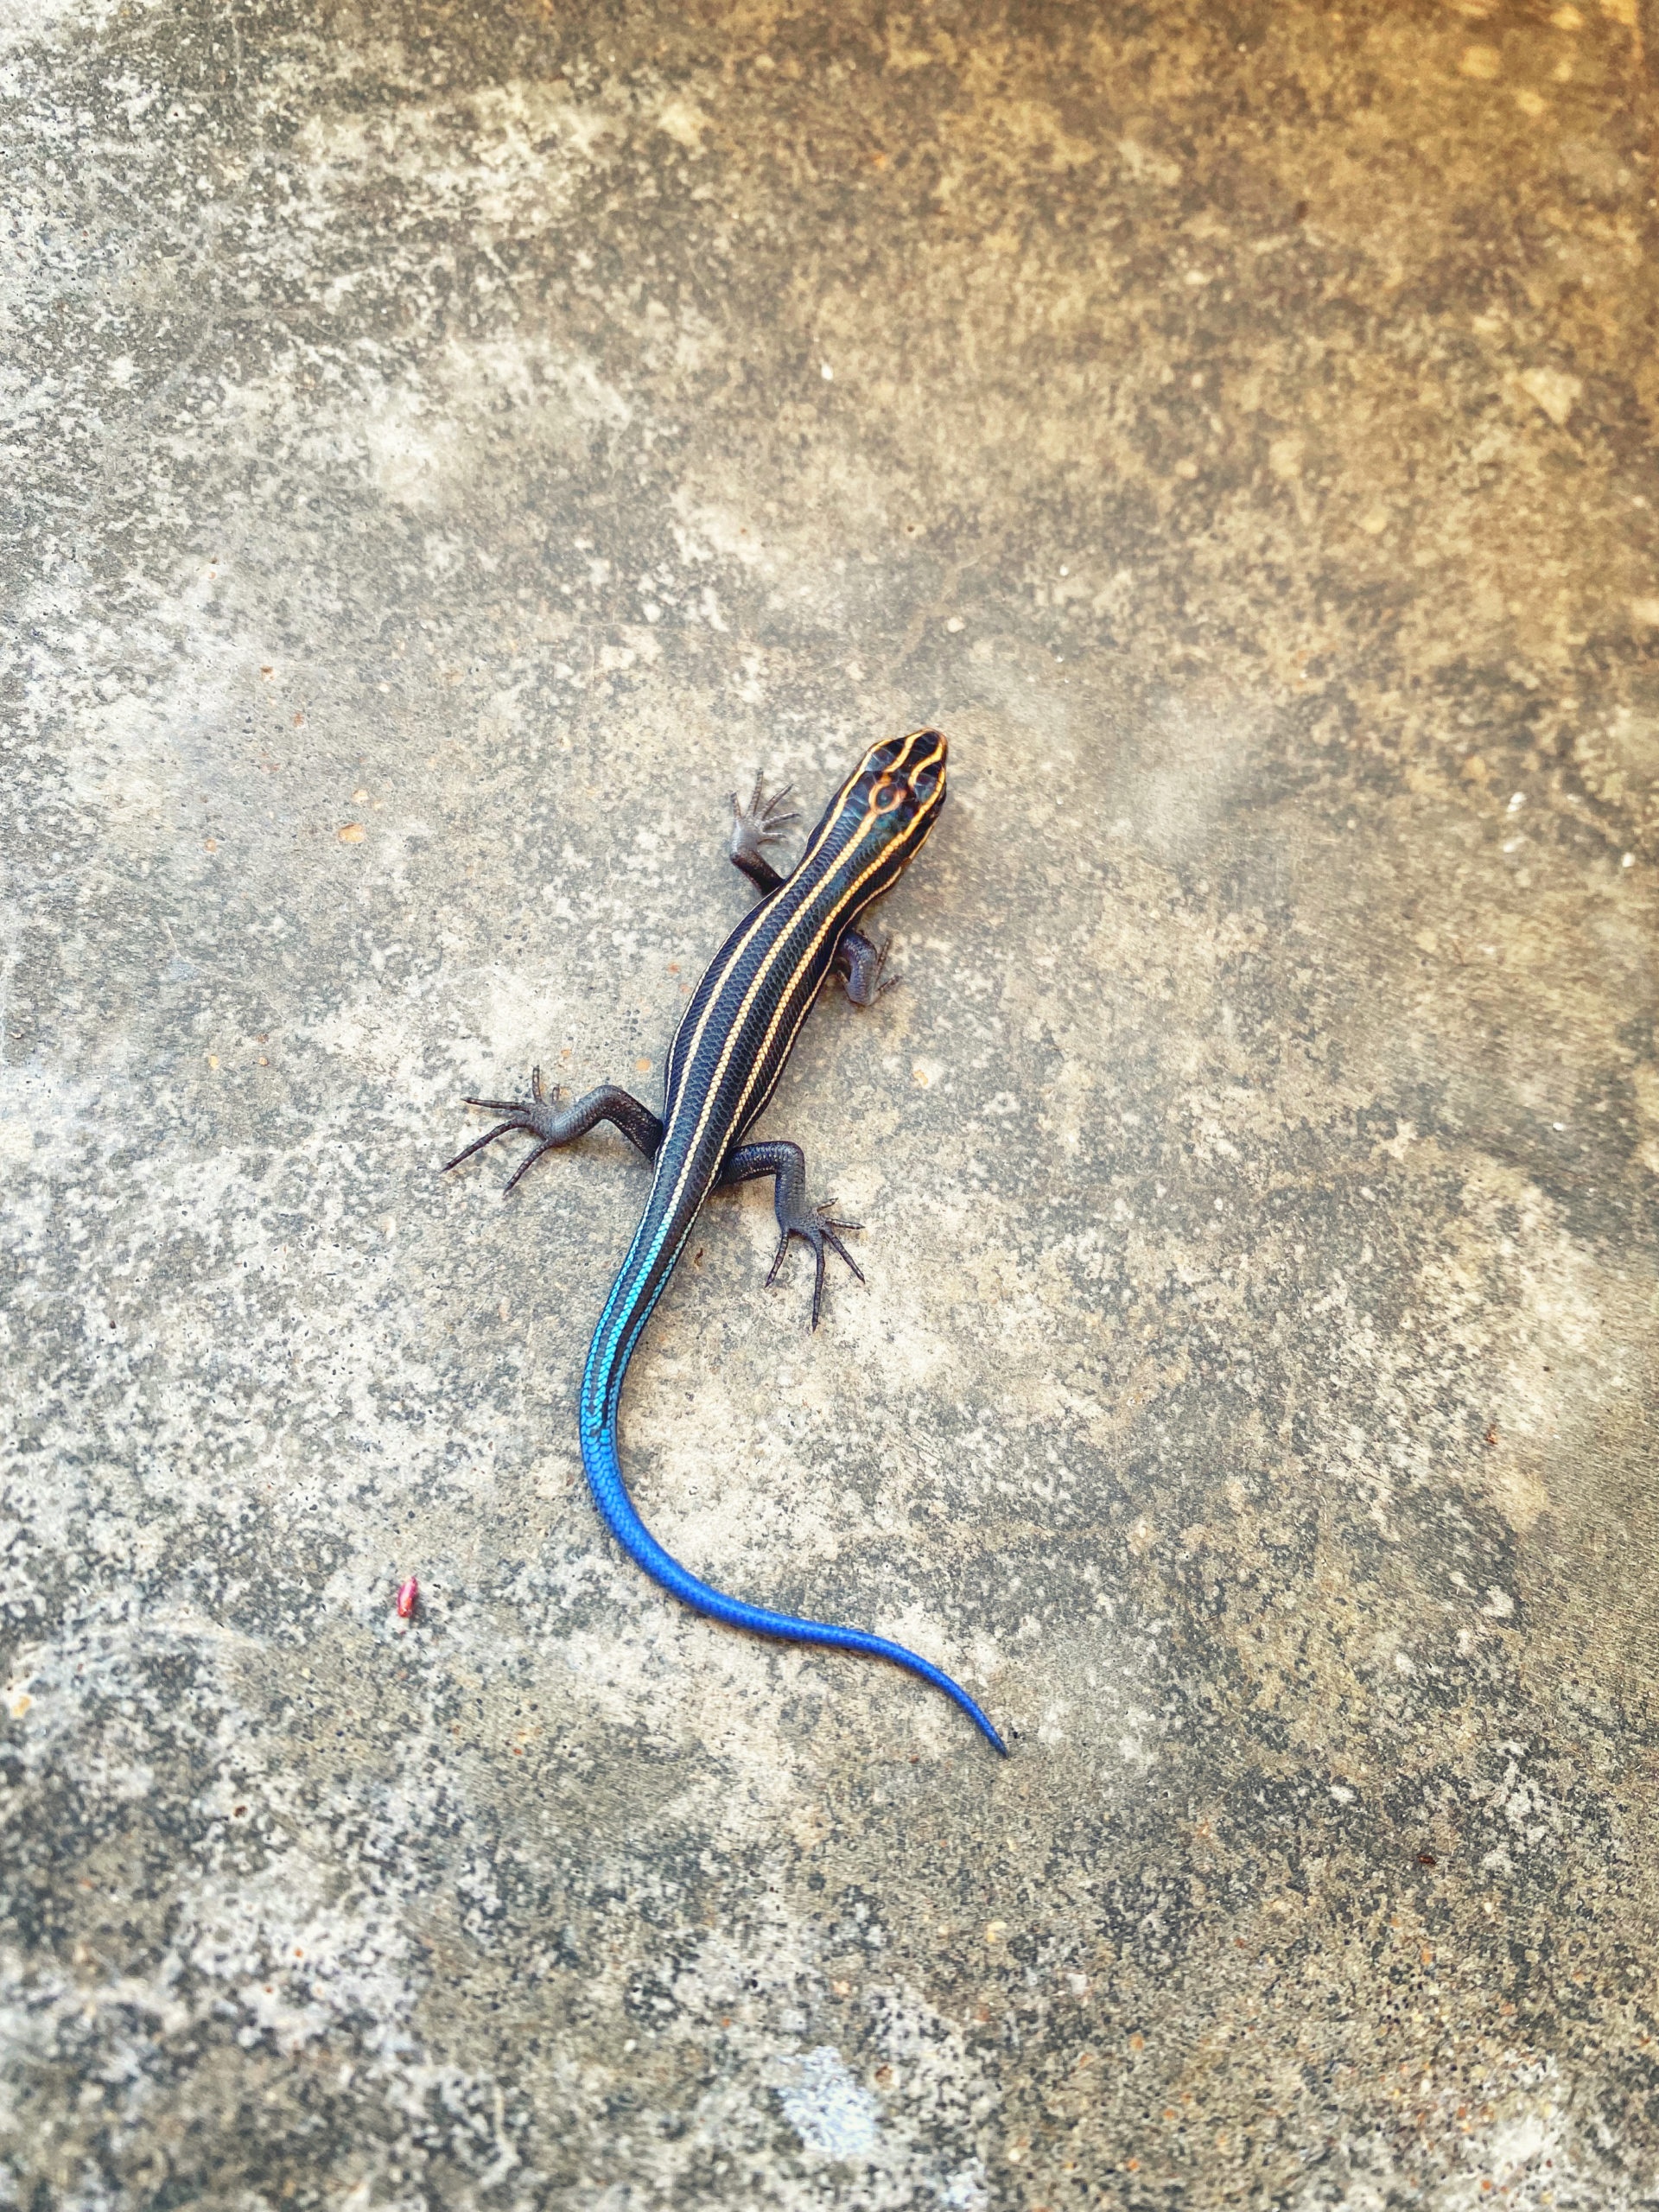 A top-down photo of a lizard on concrete. It has a black body with yellow stripes running the length, transitioning into a bright blue tail.